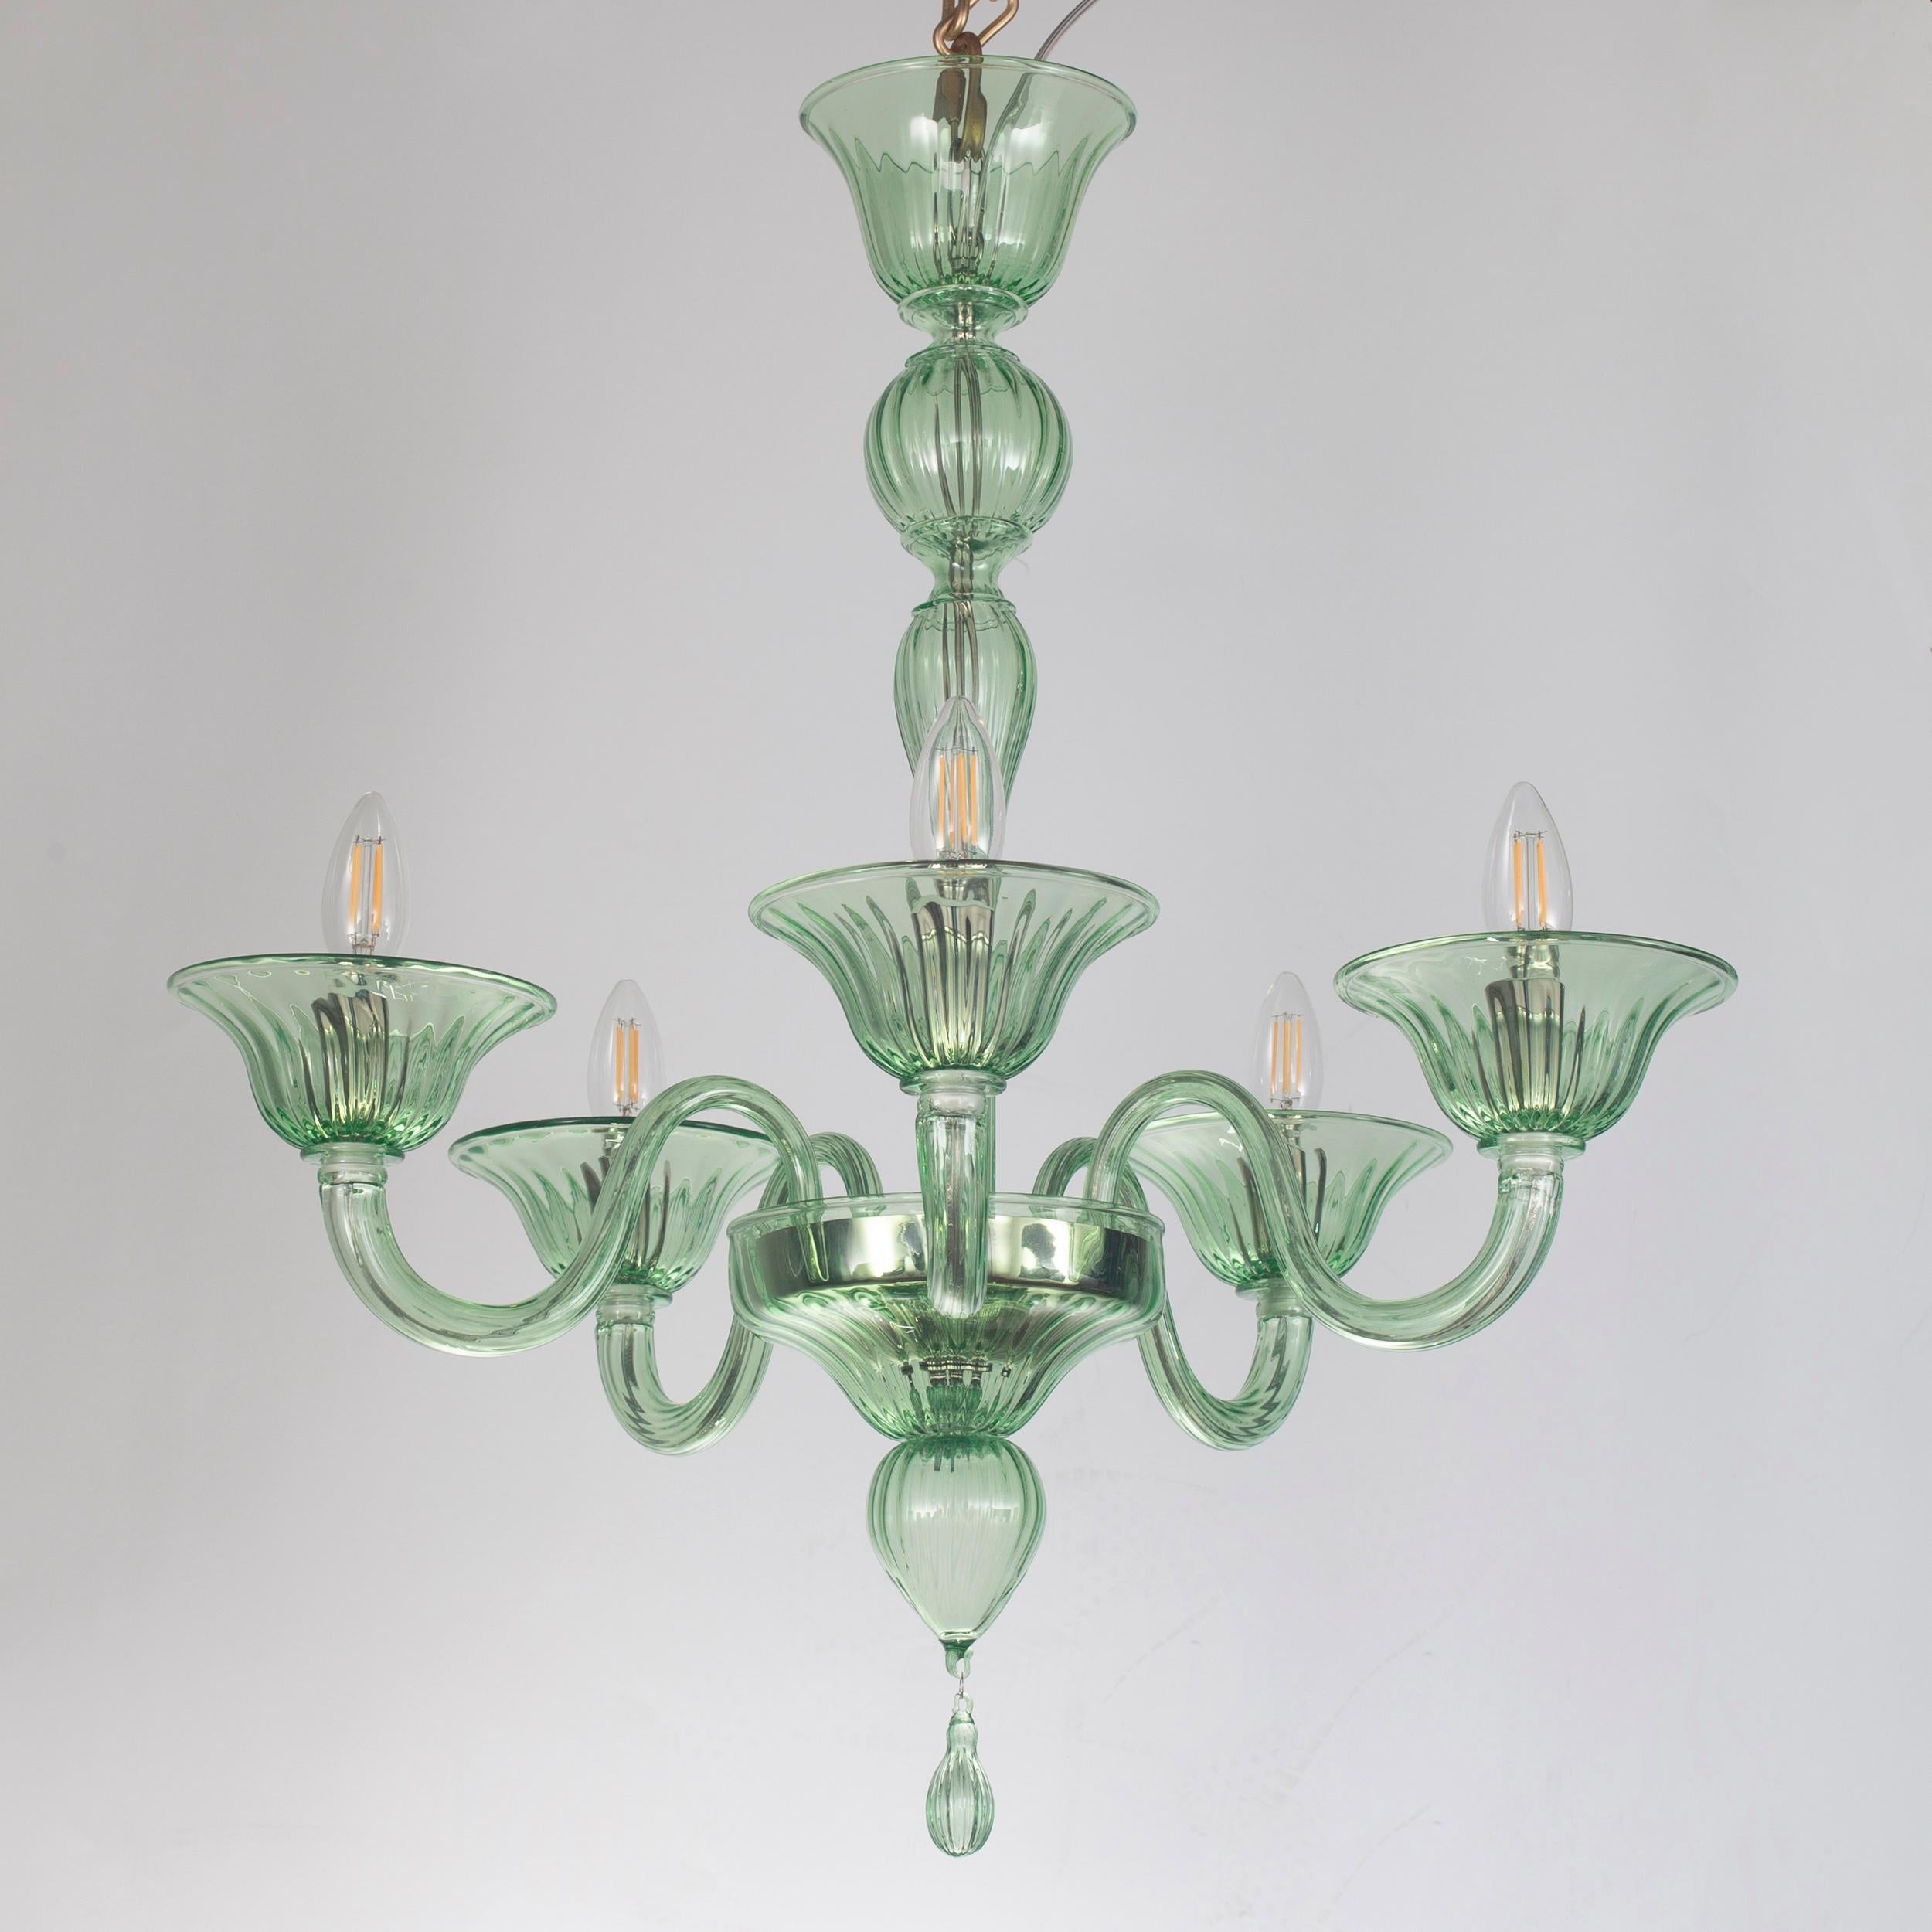 Classic chandelier, 5 arms green Murano glass Simplicissimus by Multiforme
This collection in Murano glass is characterized by superb simplicity. It is the result of a research which harks back to the Classic Murano chandeliers, with the purpose of